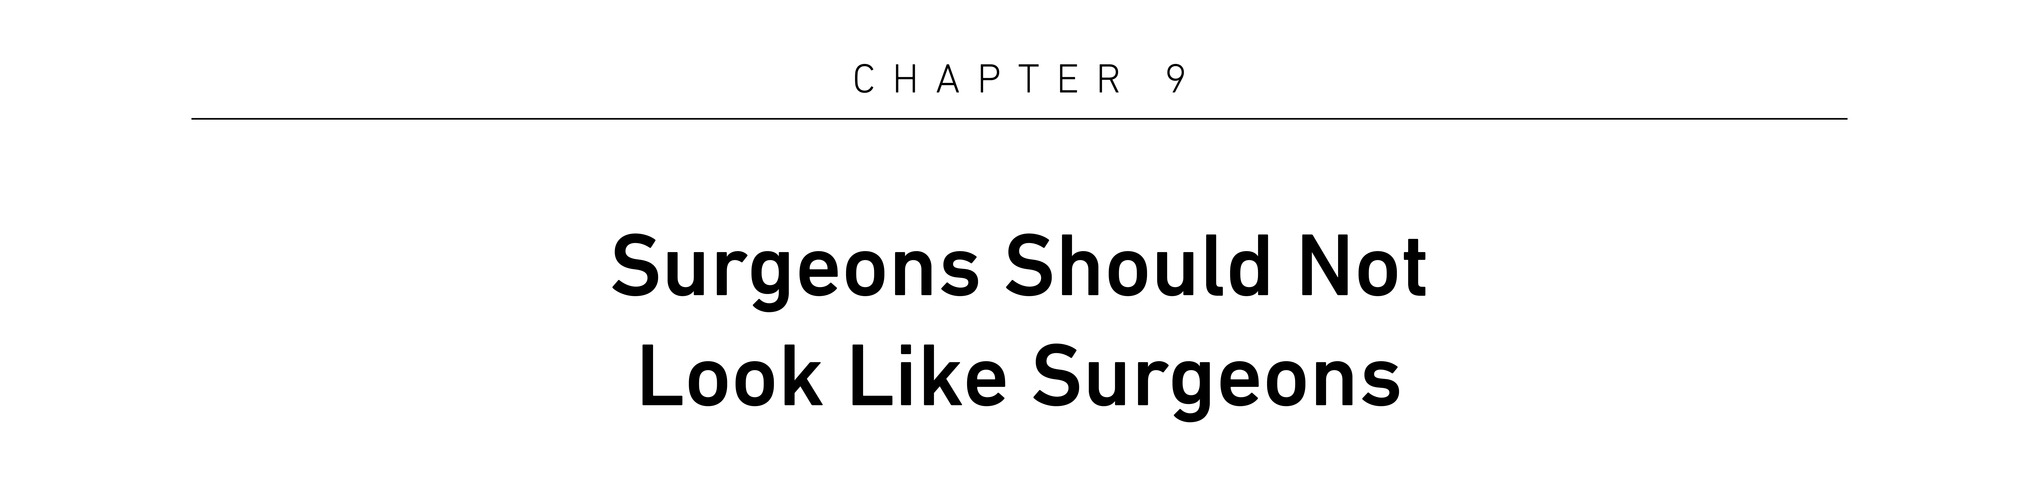 Chapter 9 Surgeons Should Not Look Like Surgeons